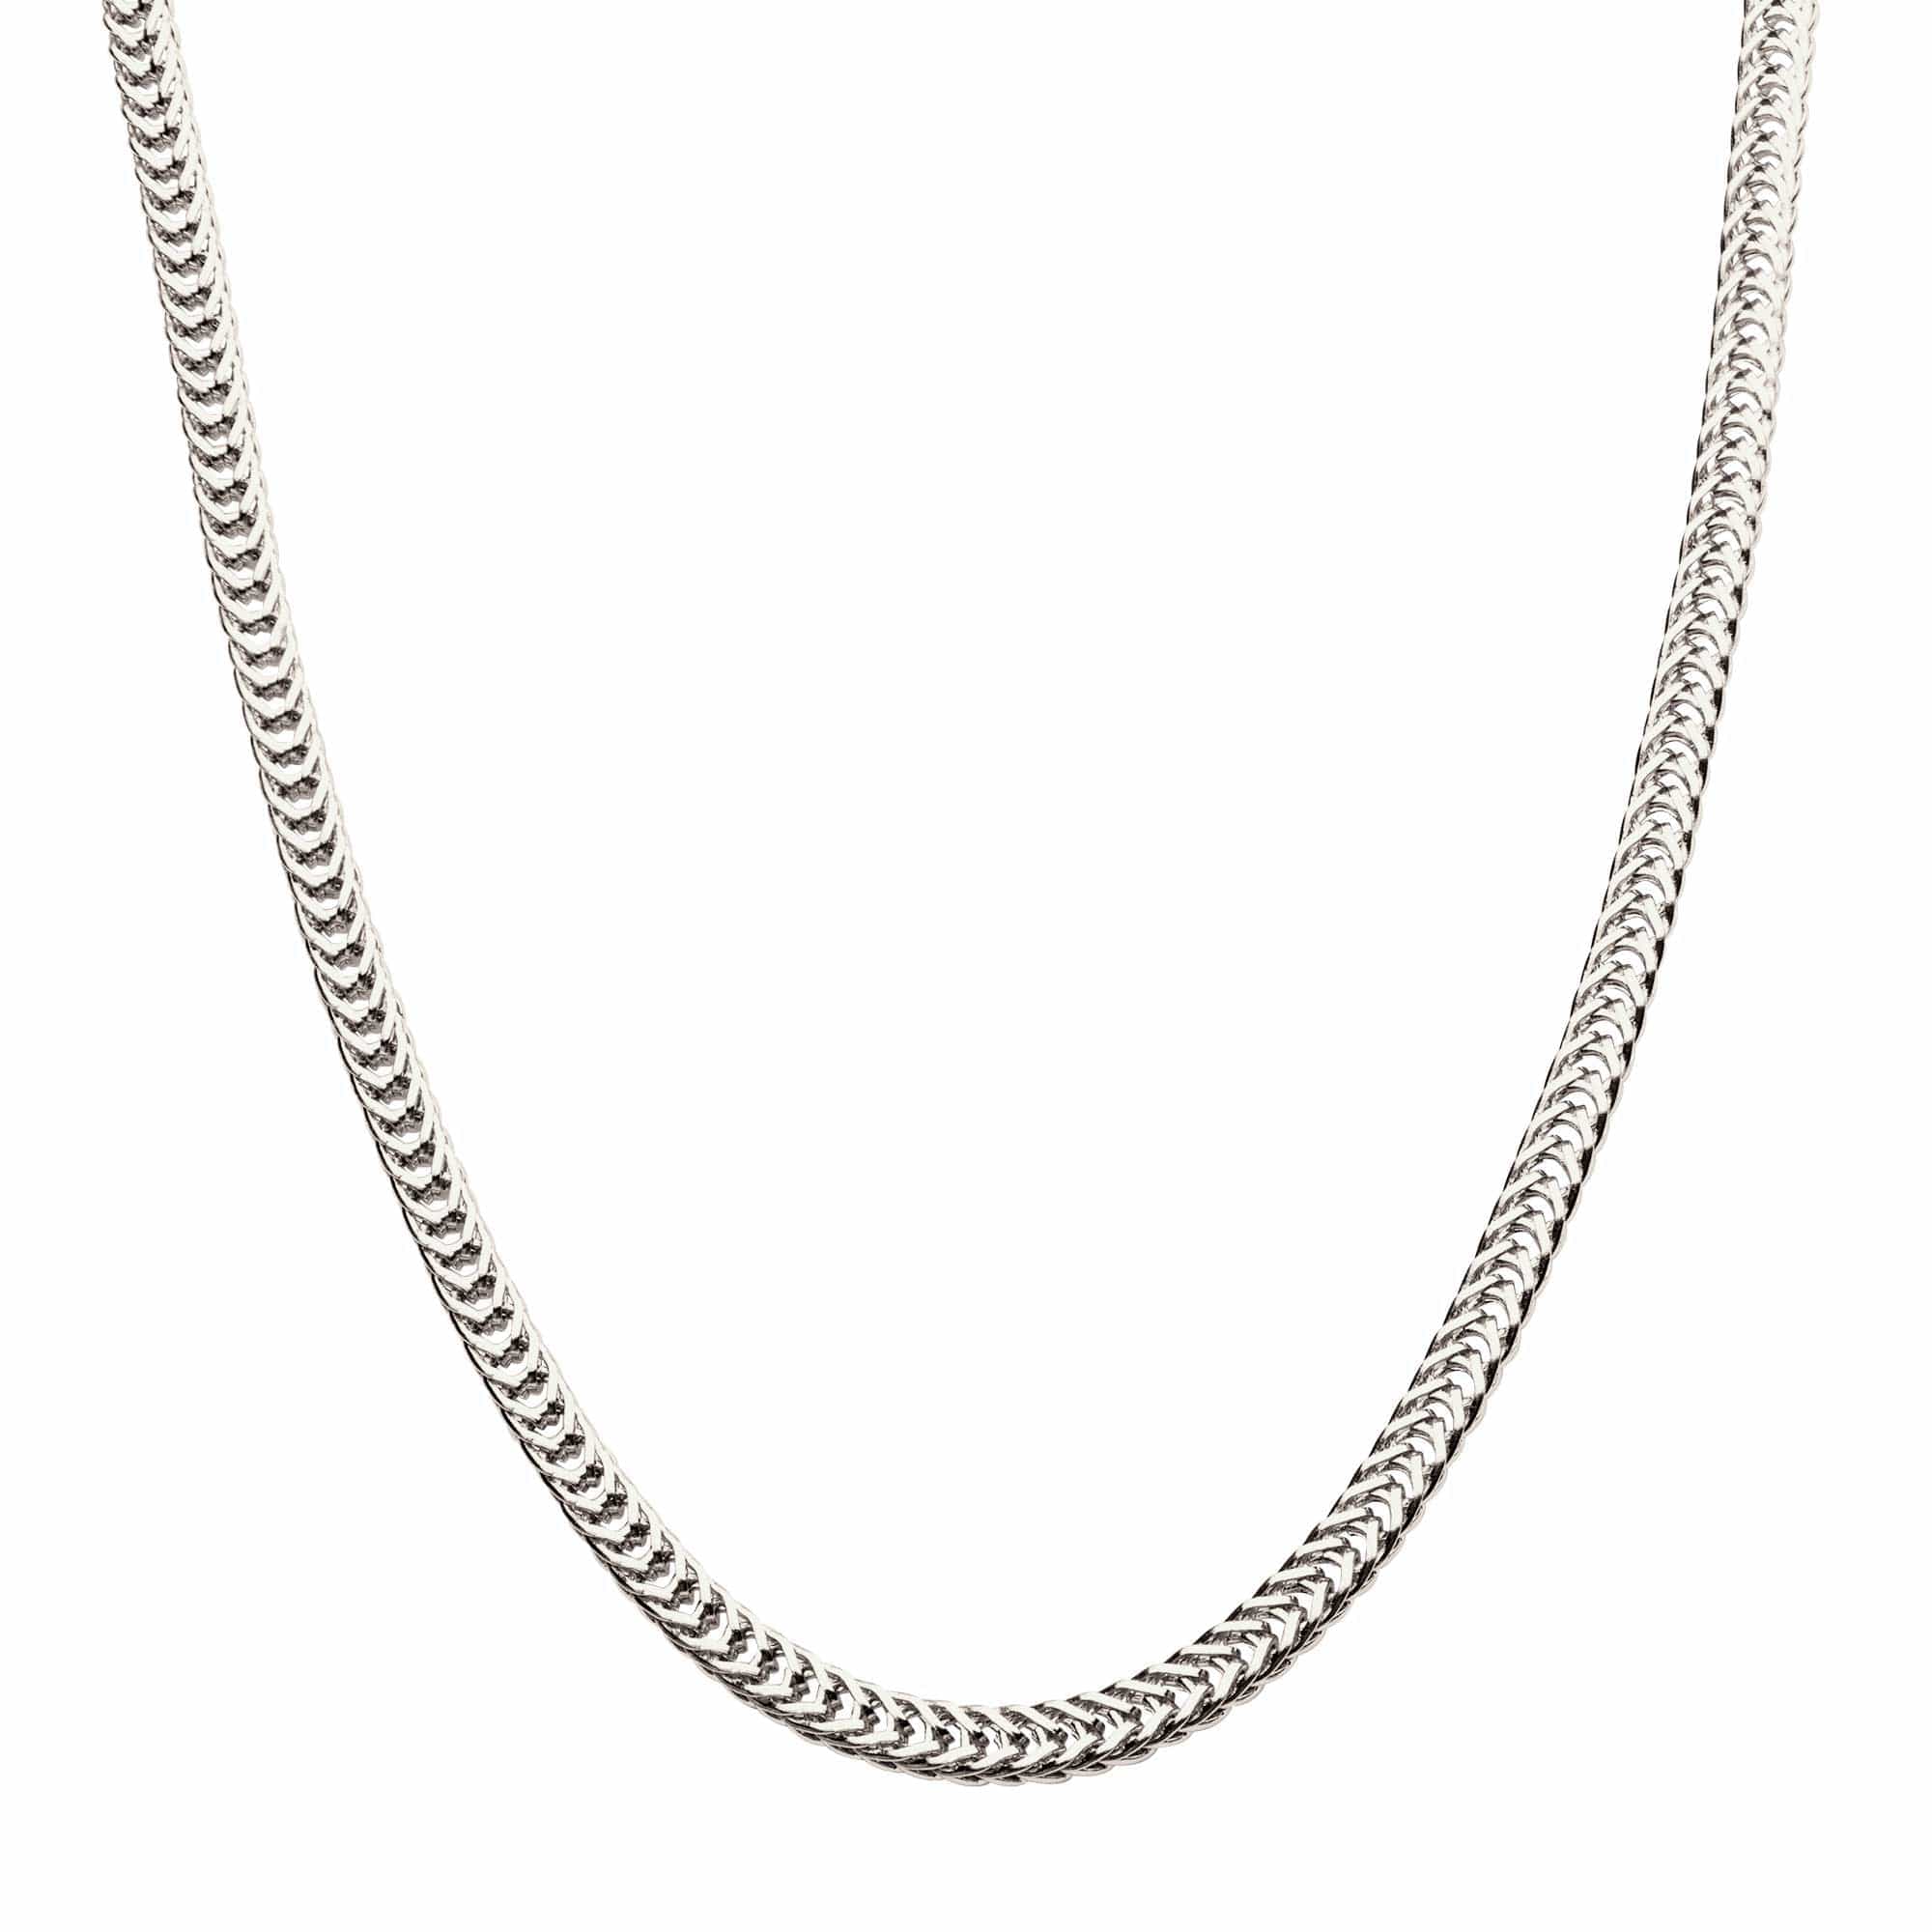 INOX JEWELRY Chains Silver Tone Stainless Steel 4mm Foxtail Chain